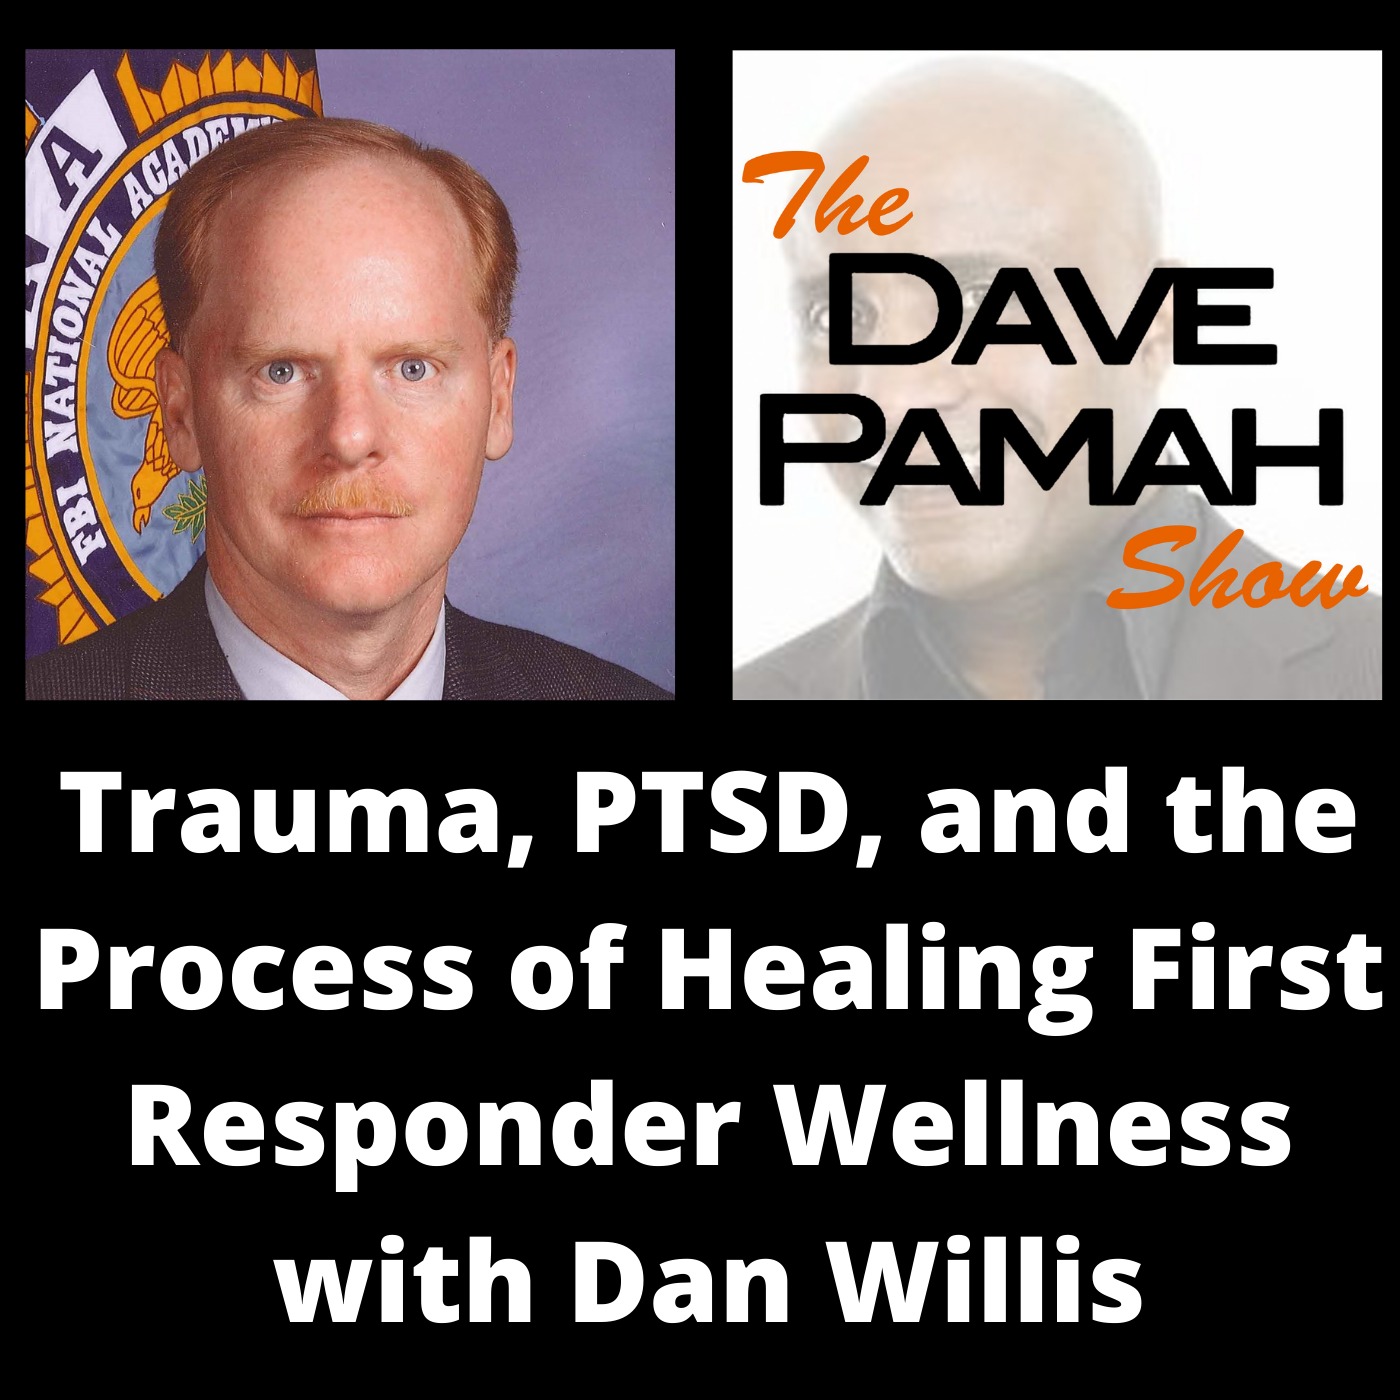 Trauma, PTSD, and the Process of Healing First Responder Wellness with Dan Willis